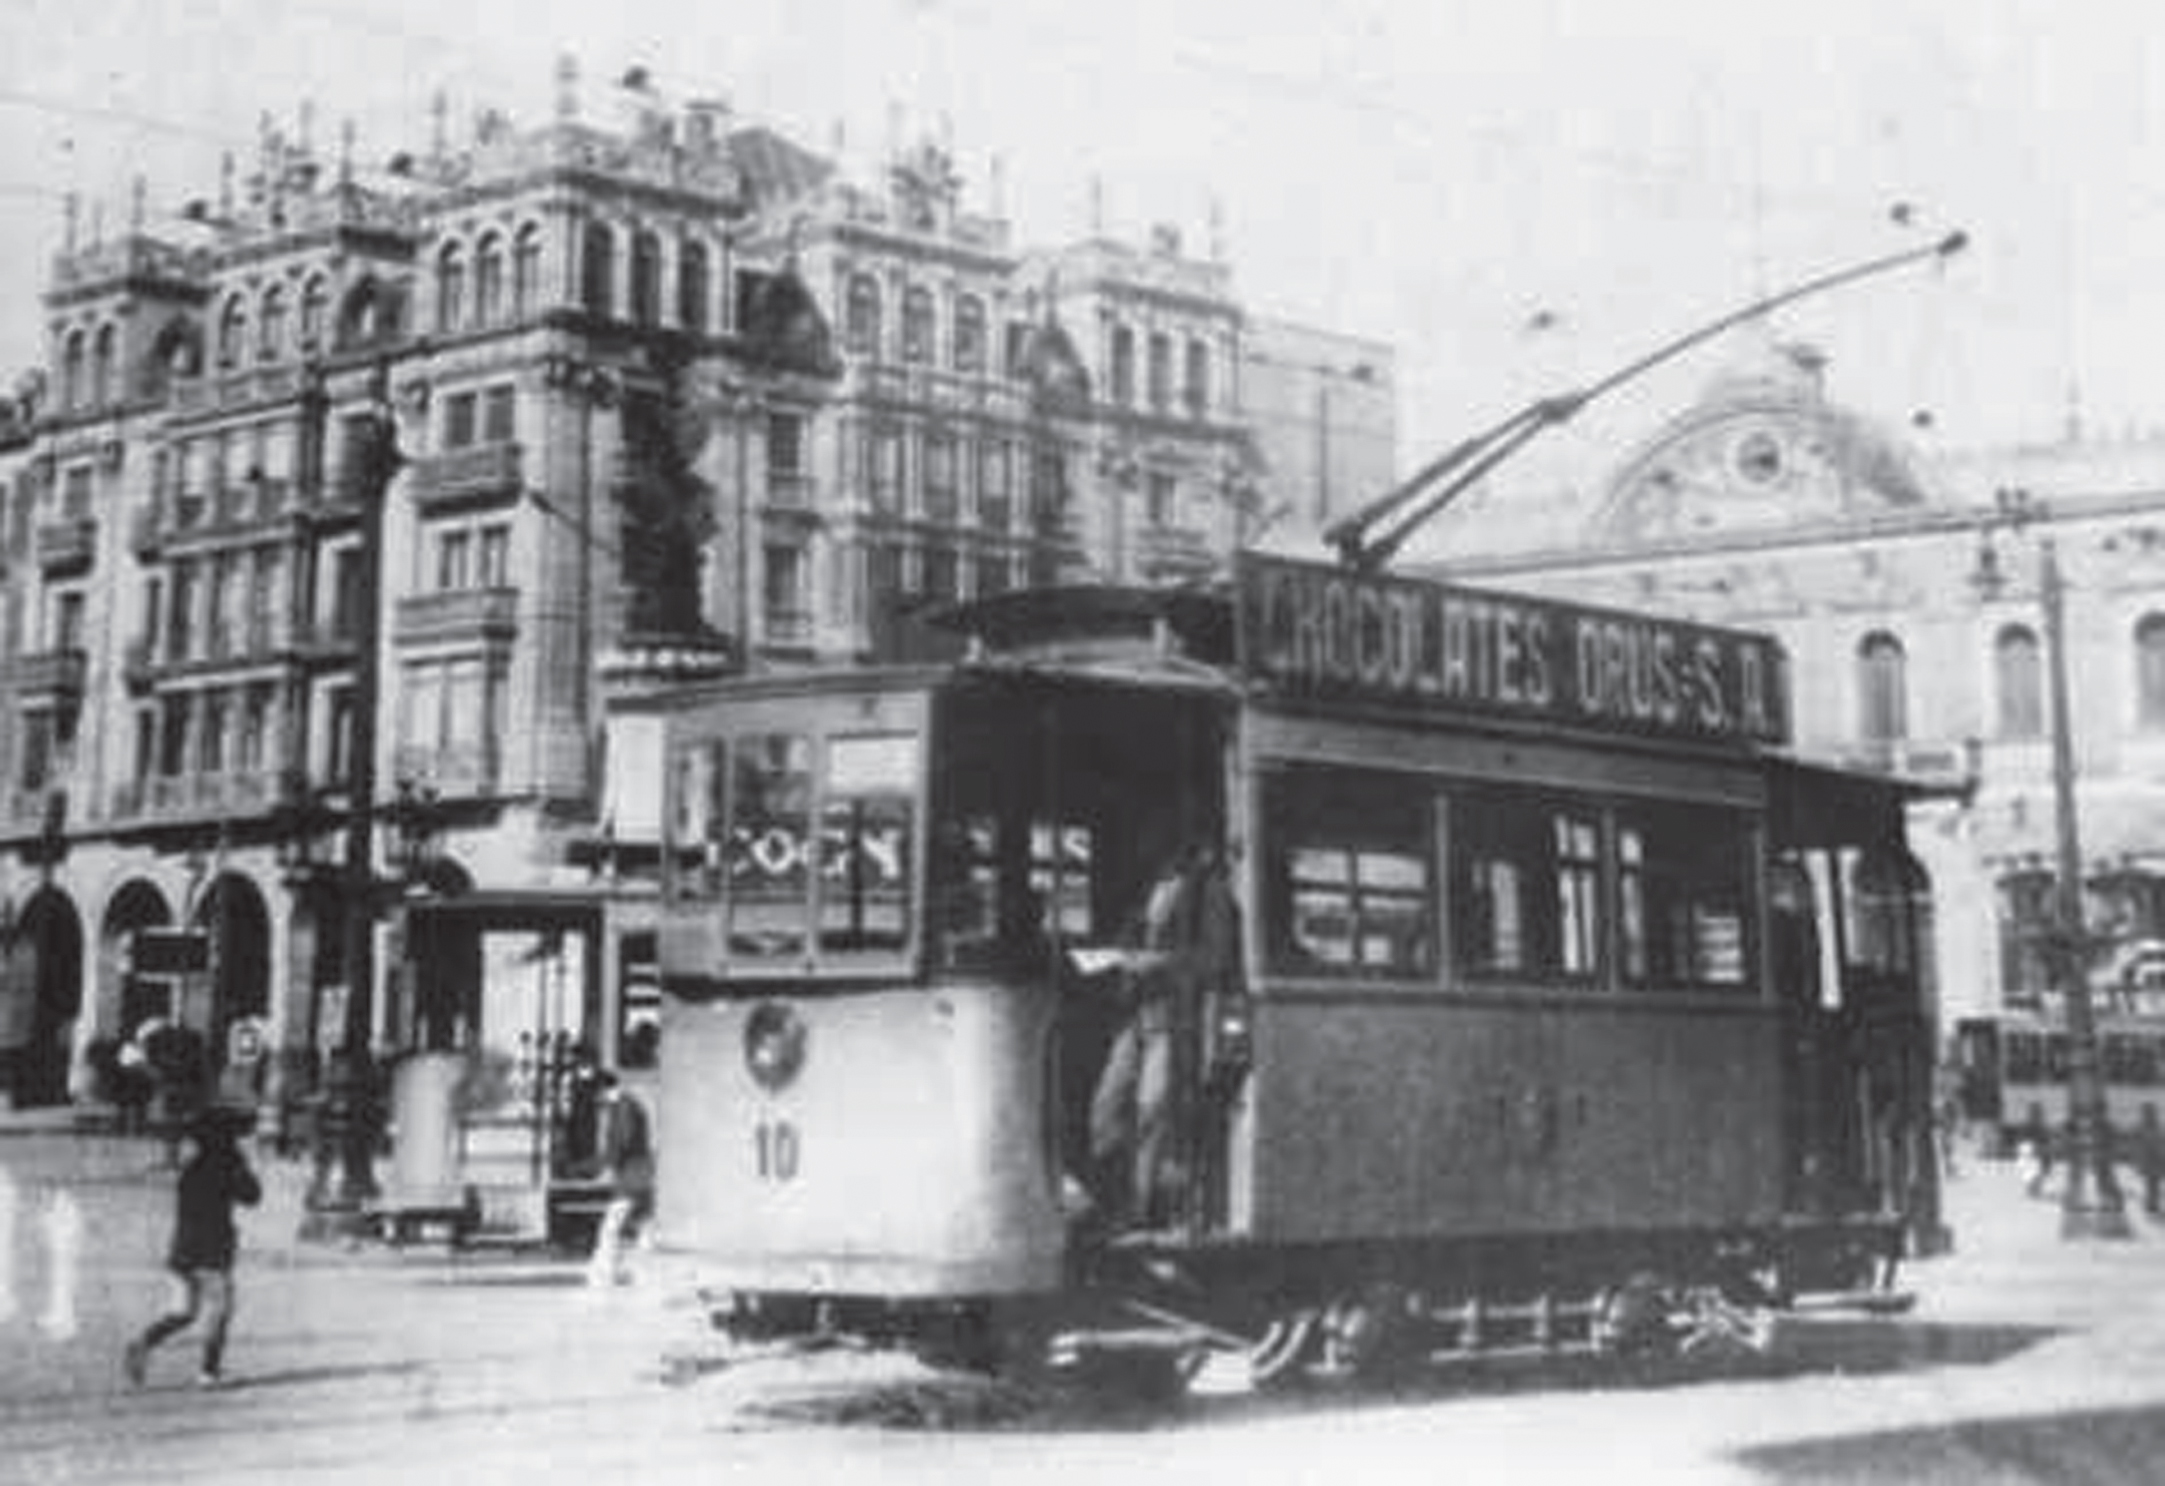 In February 1951, the Barcelona authorities announced a 40% rise in tram fares. Agitation against the rise began immediately. Around 97% of tram users joined the boycott on the first day, and by March 4 this figure had risen to 99%. Several days later the authorities caved and the old fares were reinstated. I was born the 8 of April of that year in Rambla Cataluña unaware that a tram line circulated in both directions.